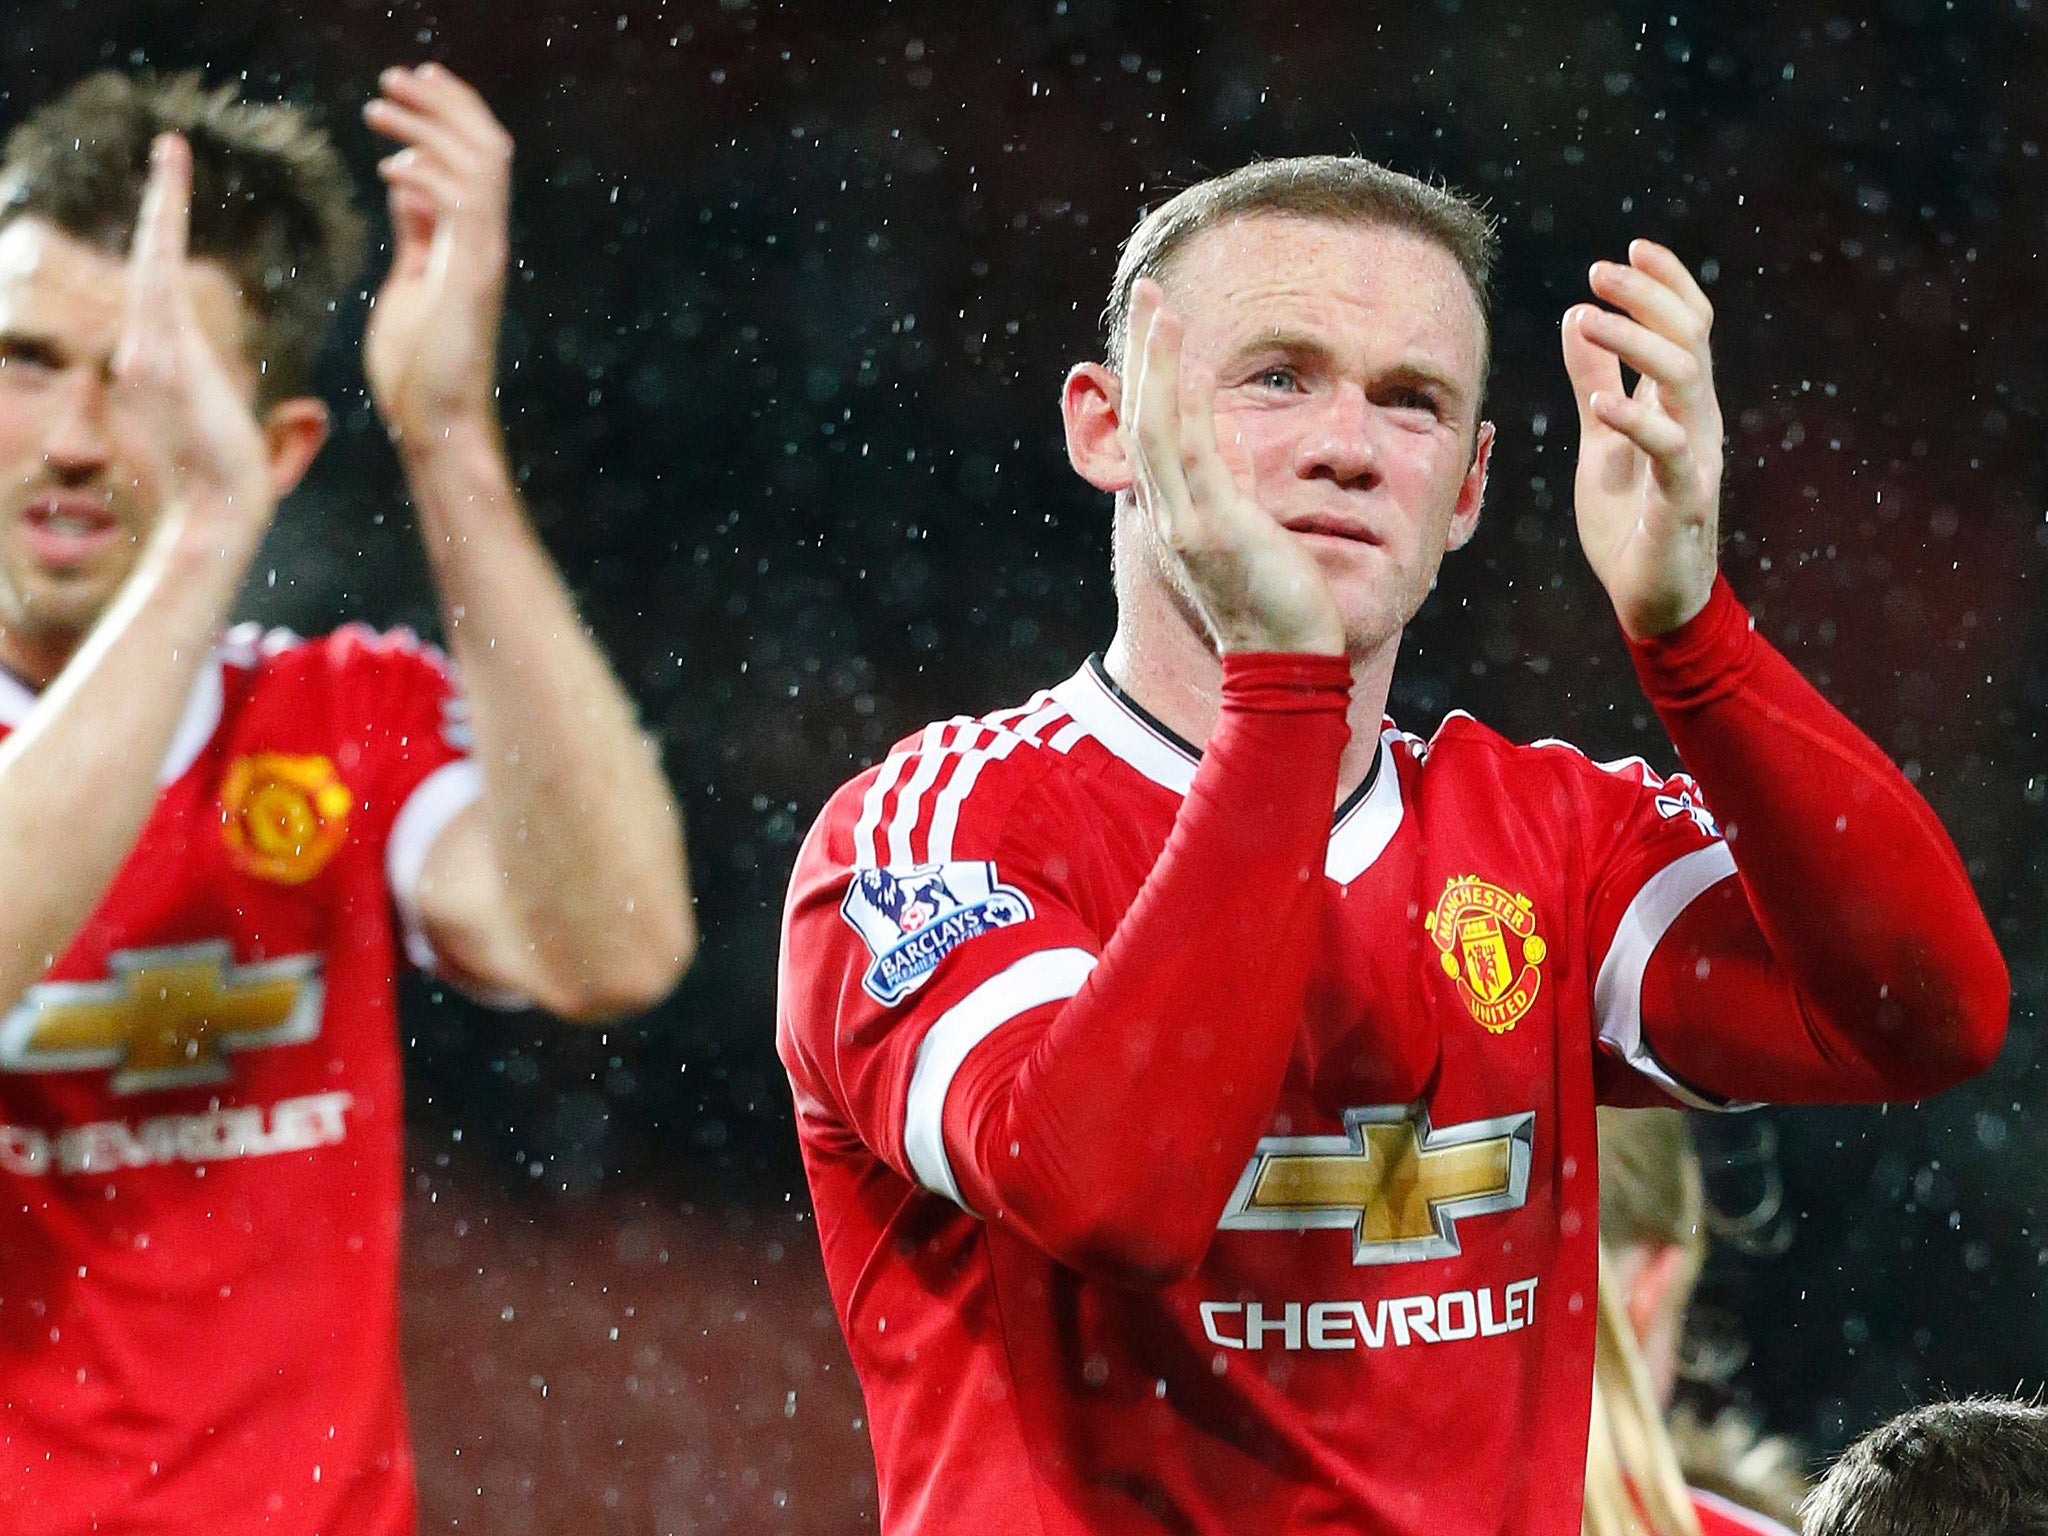 Wayne Rooney will be at the centre of proceedings when United face Everton